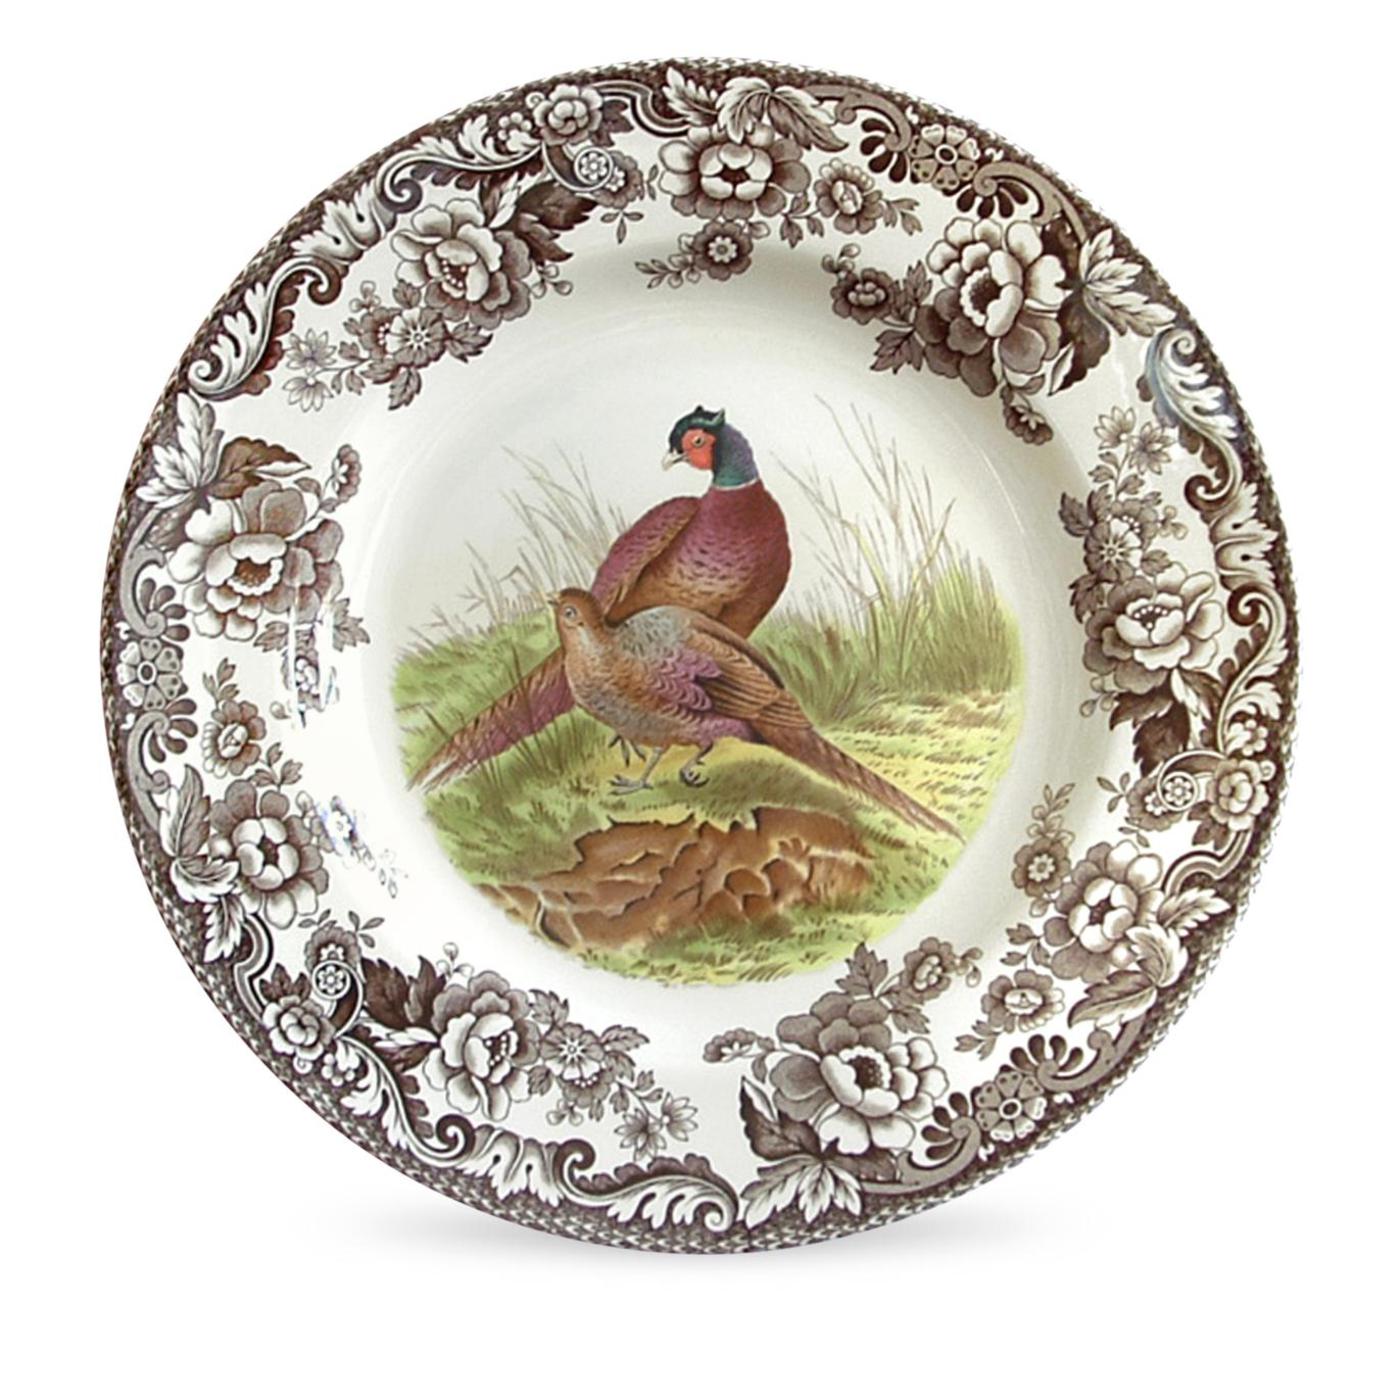 Spode Woodland Dinner Plate 10.5" - Individual-HOME/GIFTWARE-PHEASANT-Kevin's Fine Outdoor Gear & Apparel